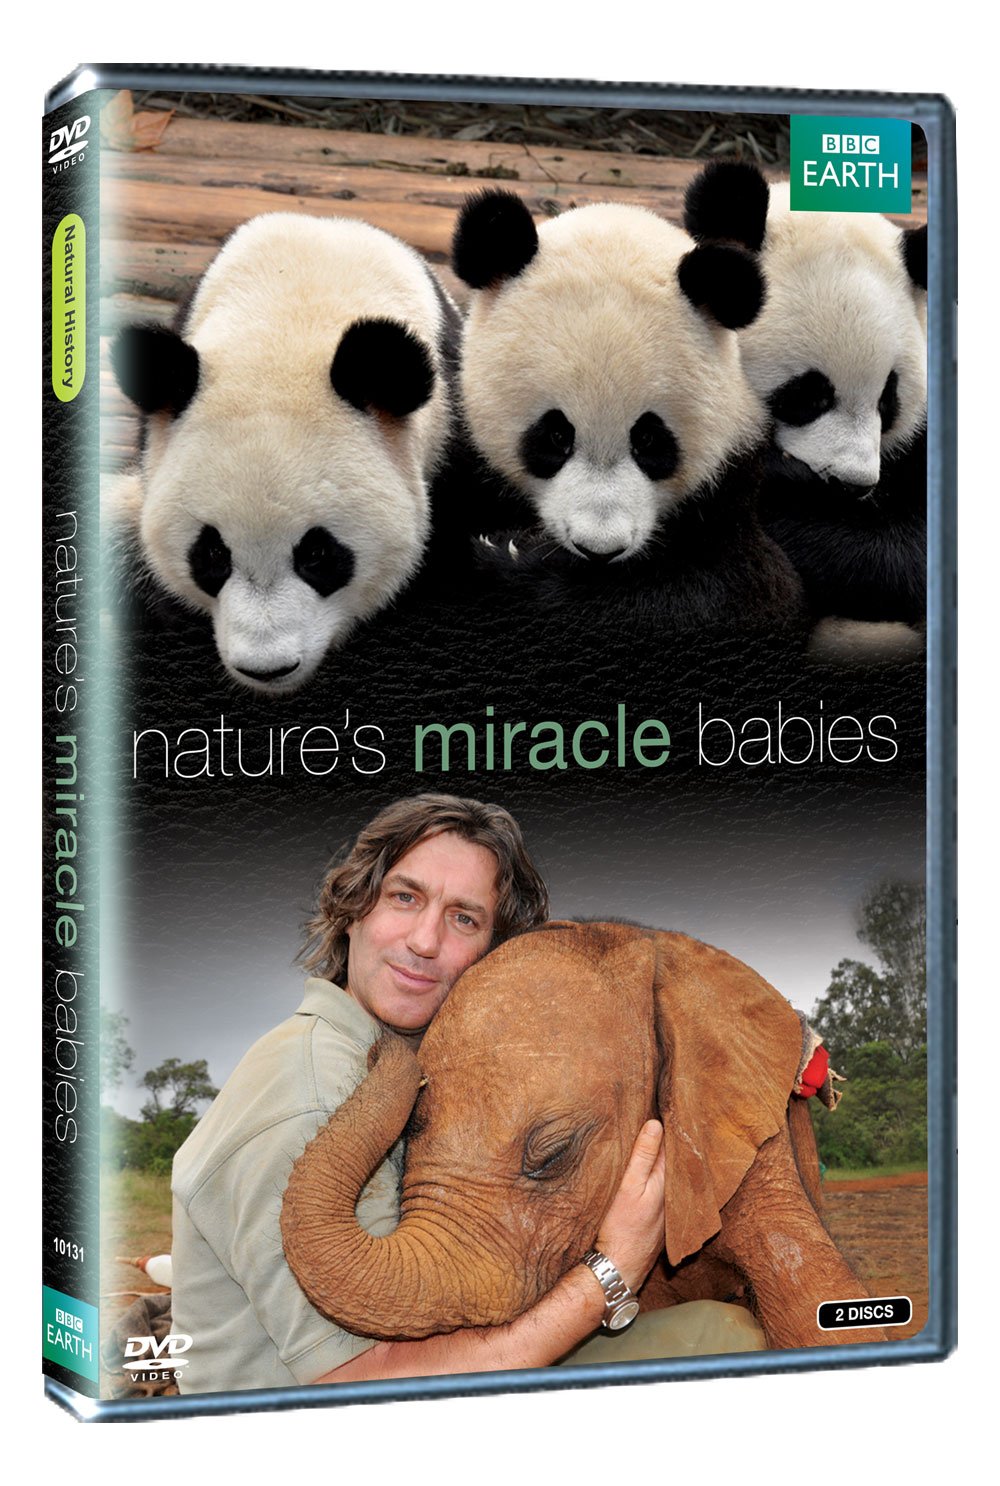 natures-miracle-babies-movie-purchase-or-watch-online